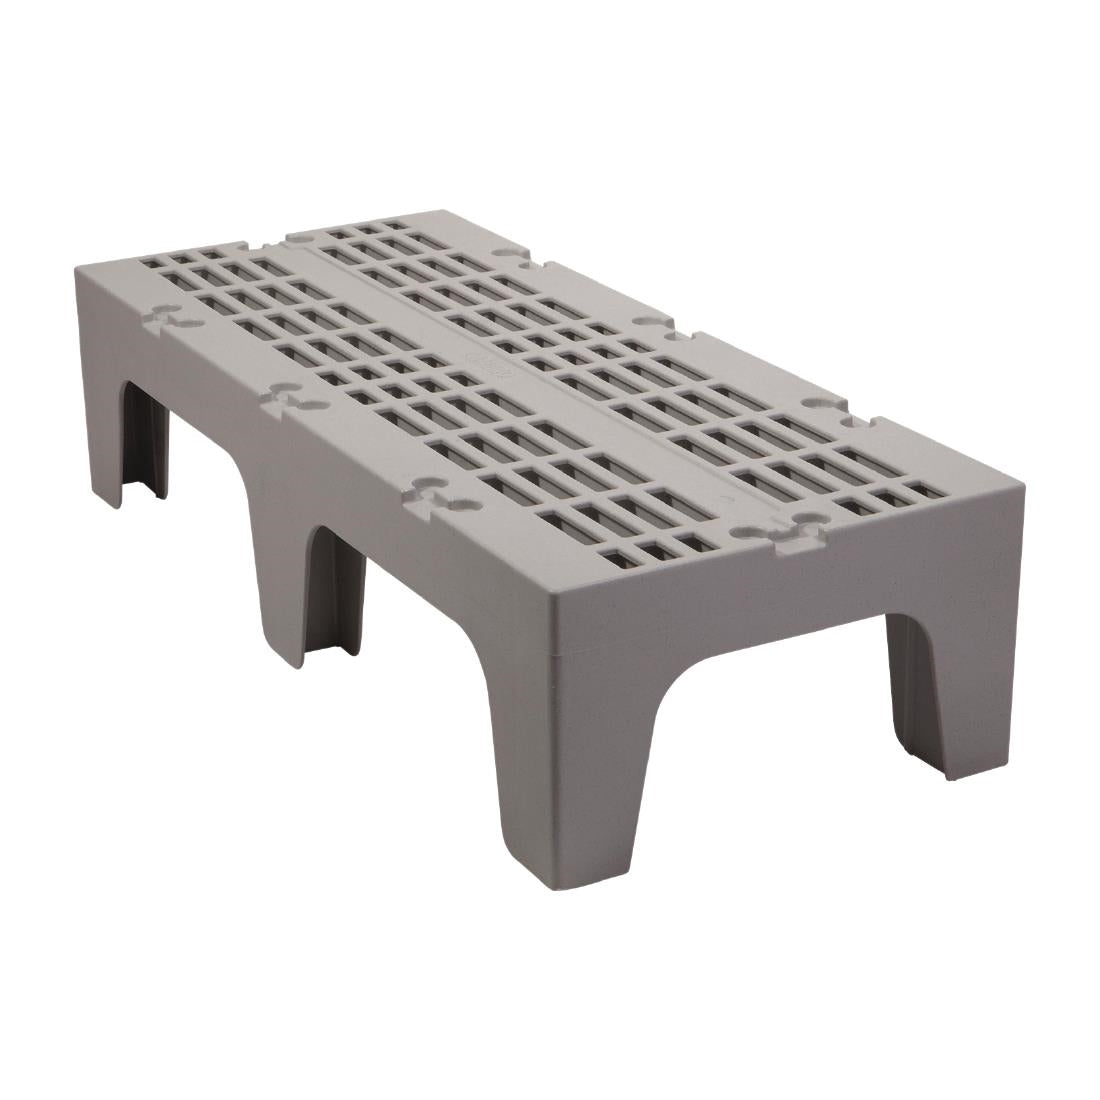 FE721 Cambro Dunnage Rack 300 x 533 x 1220mm JD Catering Equipment Solutions Ltd